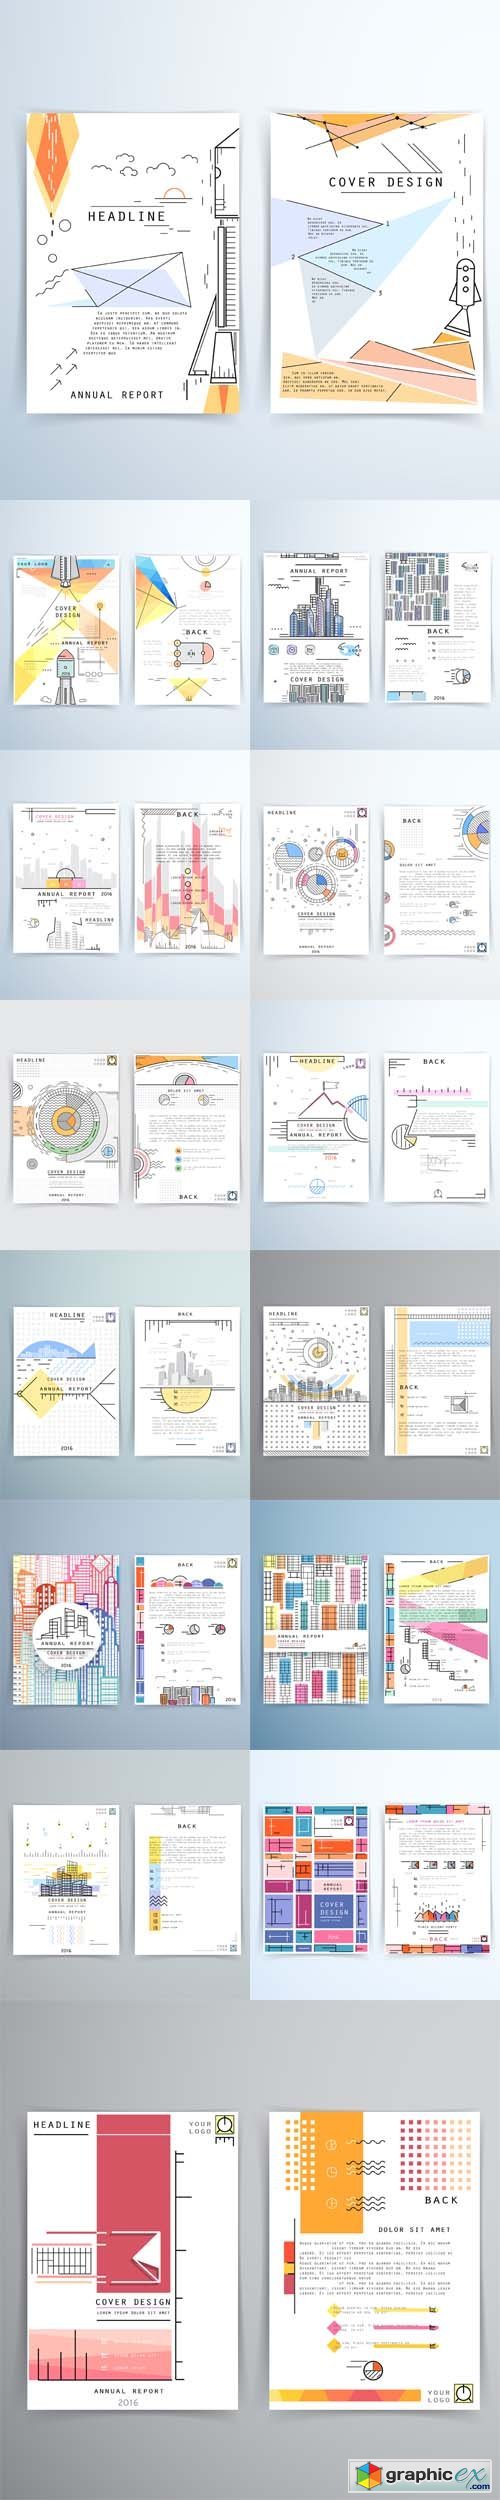 Cover design annual report. Template brochures, flyers, business presentations